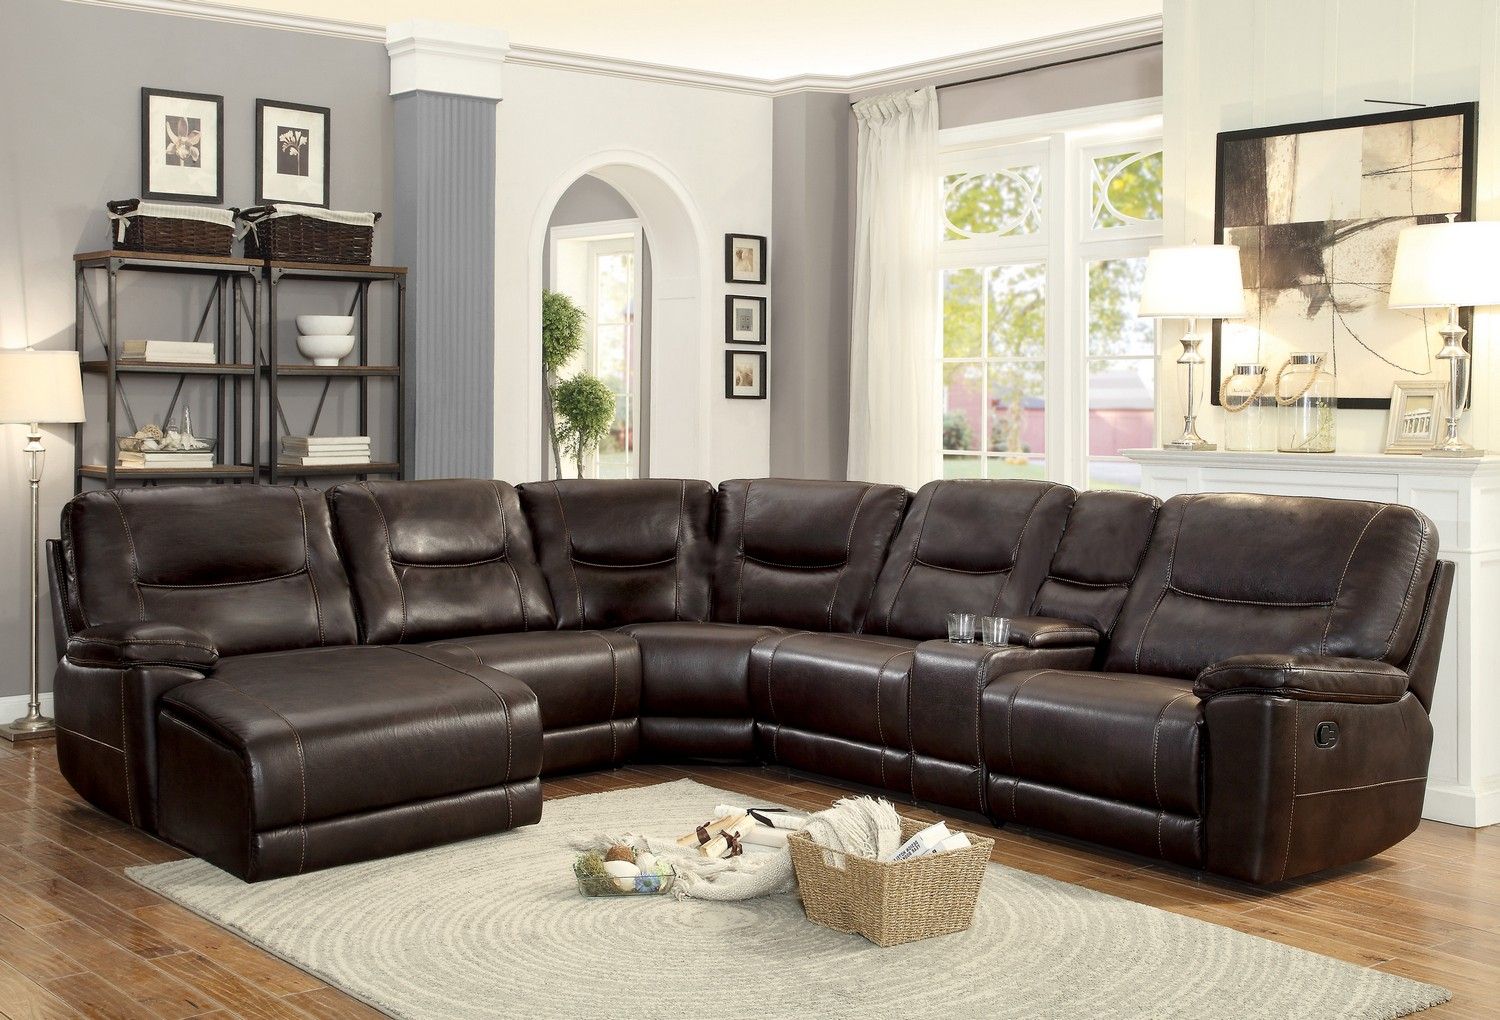 Homelegance Columbus Reclining Sectional Sofa Set B – Breathable Faux In Faux Leather Sectional Sofa Sets (Gallery 7 of 21)